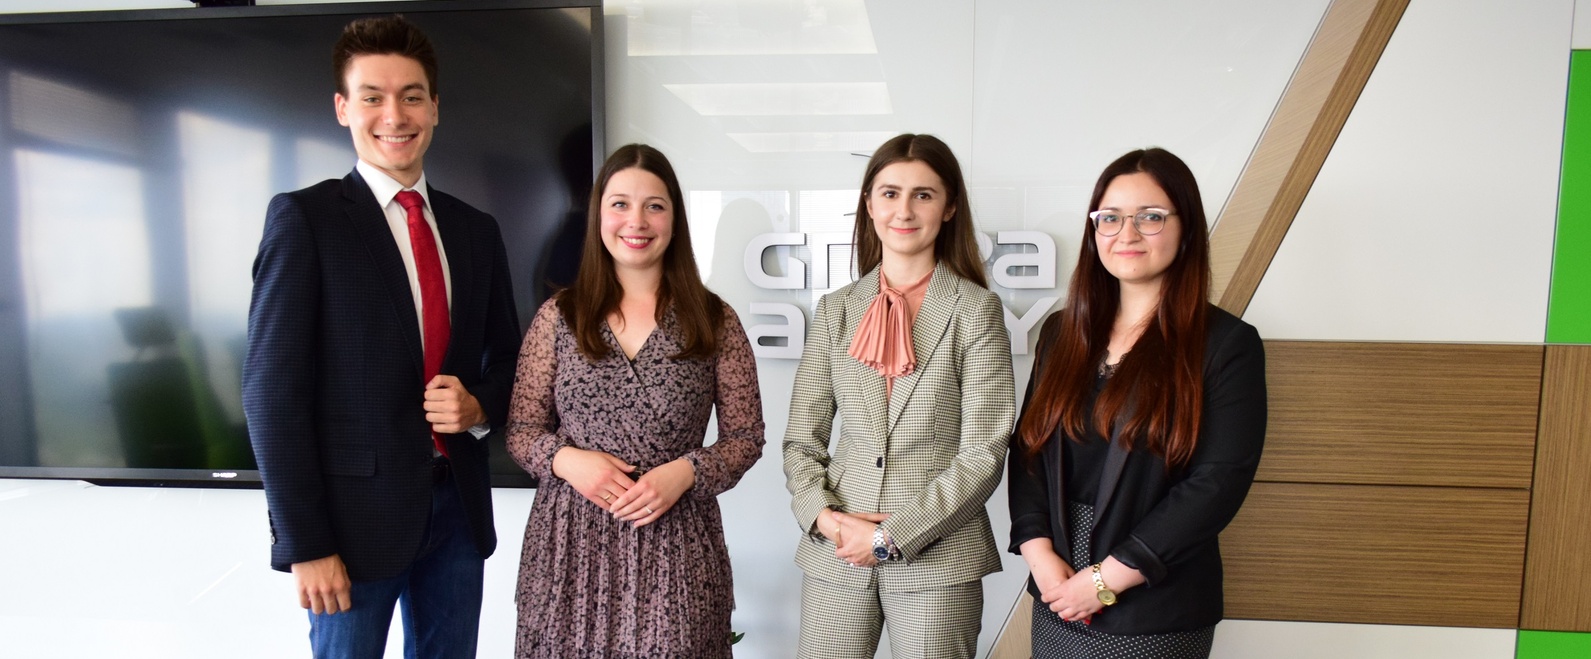 Fourth edition of Grupa Azoty Brand Ambassador programme now officially closed 